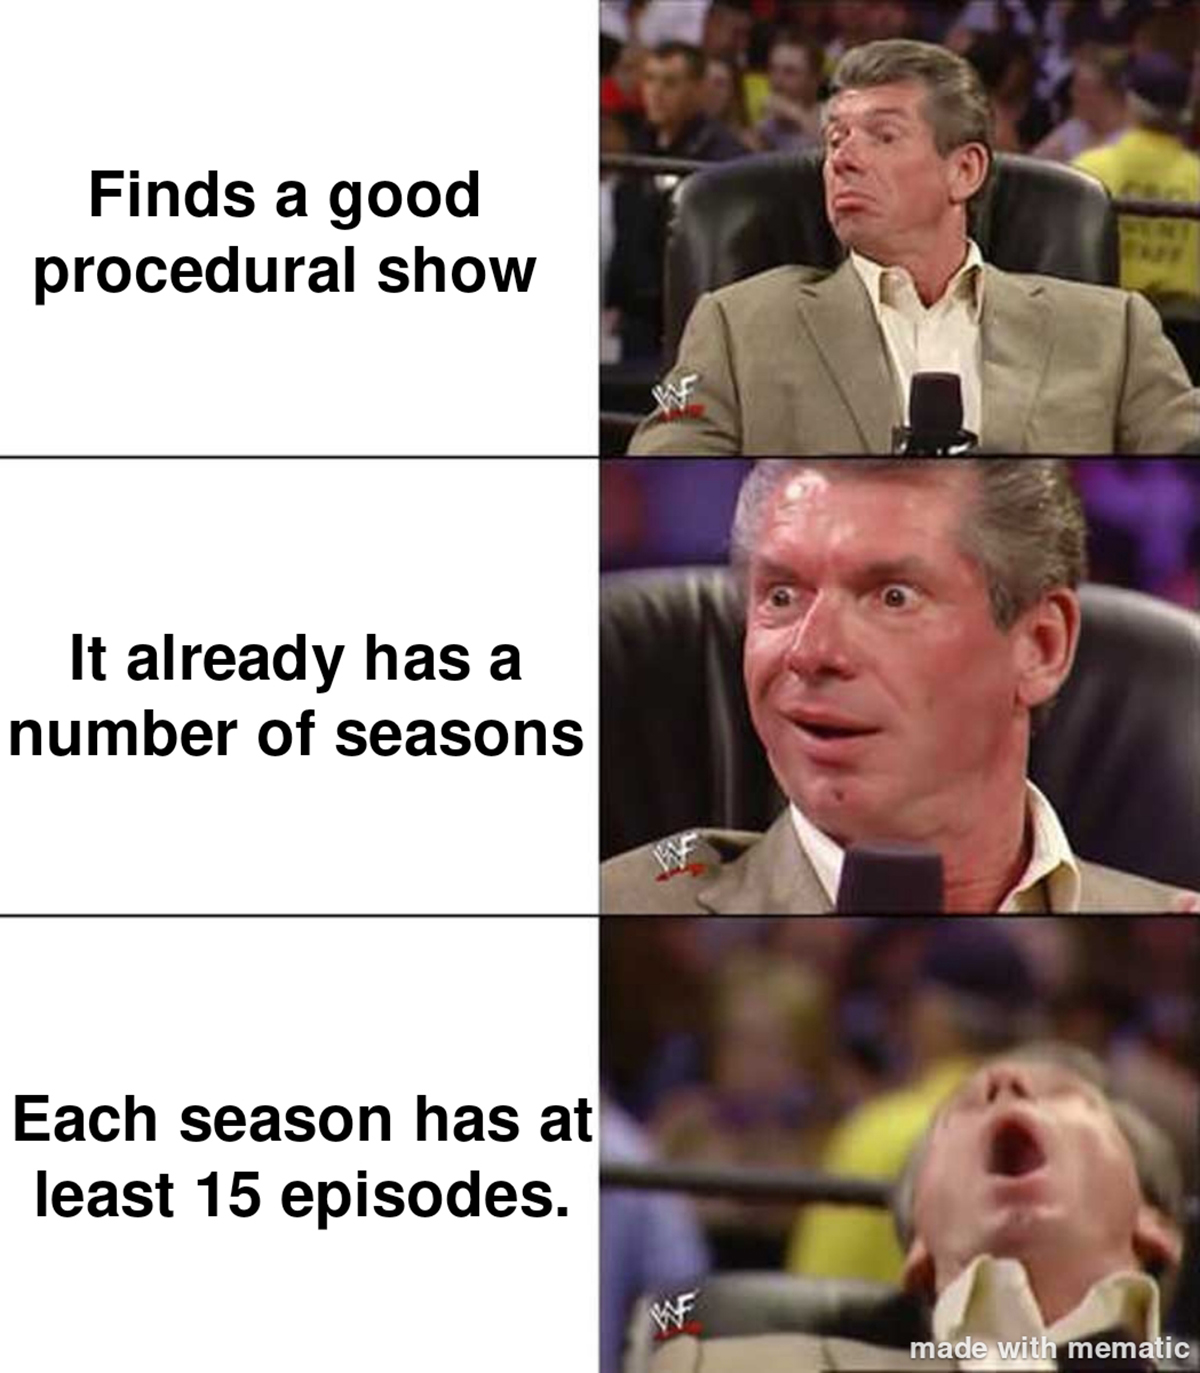 going on a date after a long time - Finds a good procedural show It already has a number of seasons Each season has at least 15 episodes. 4 made with mematic